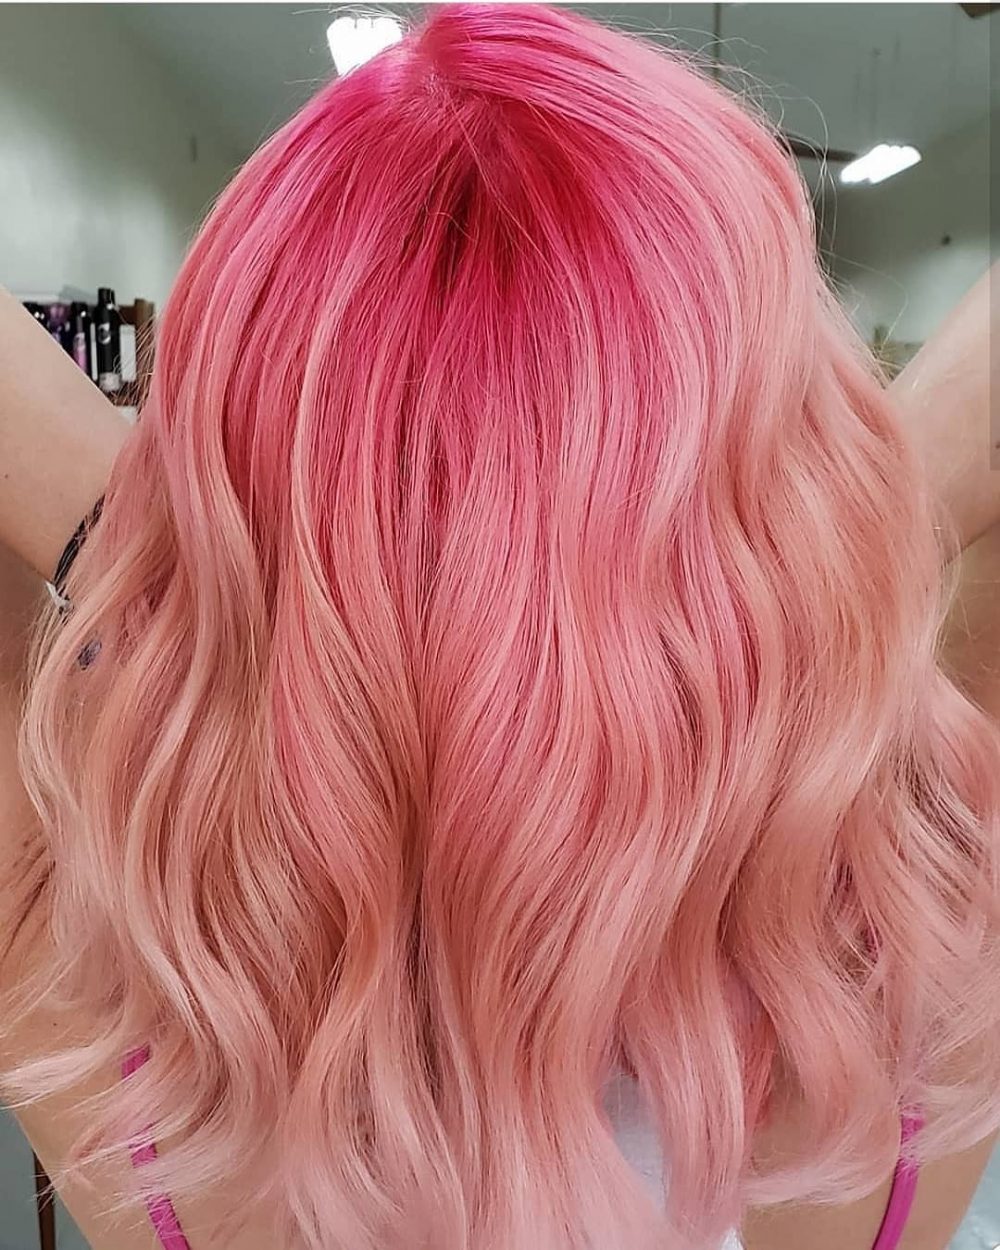 Pink and peach ombré